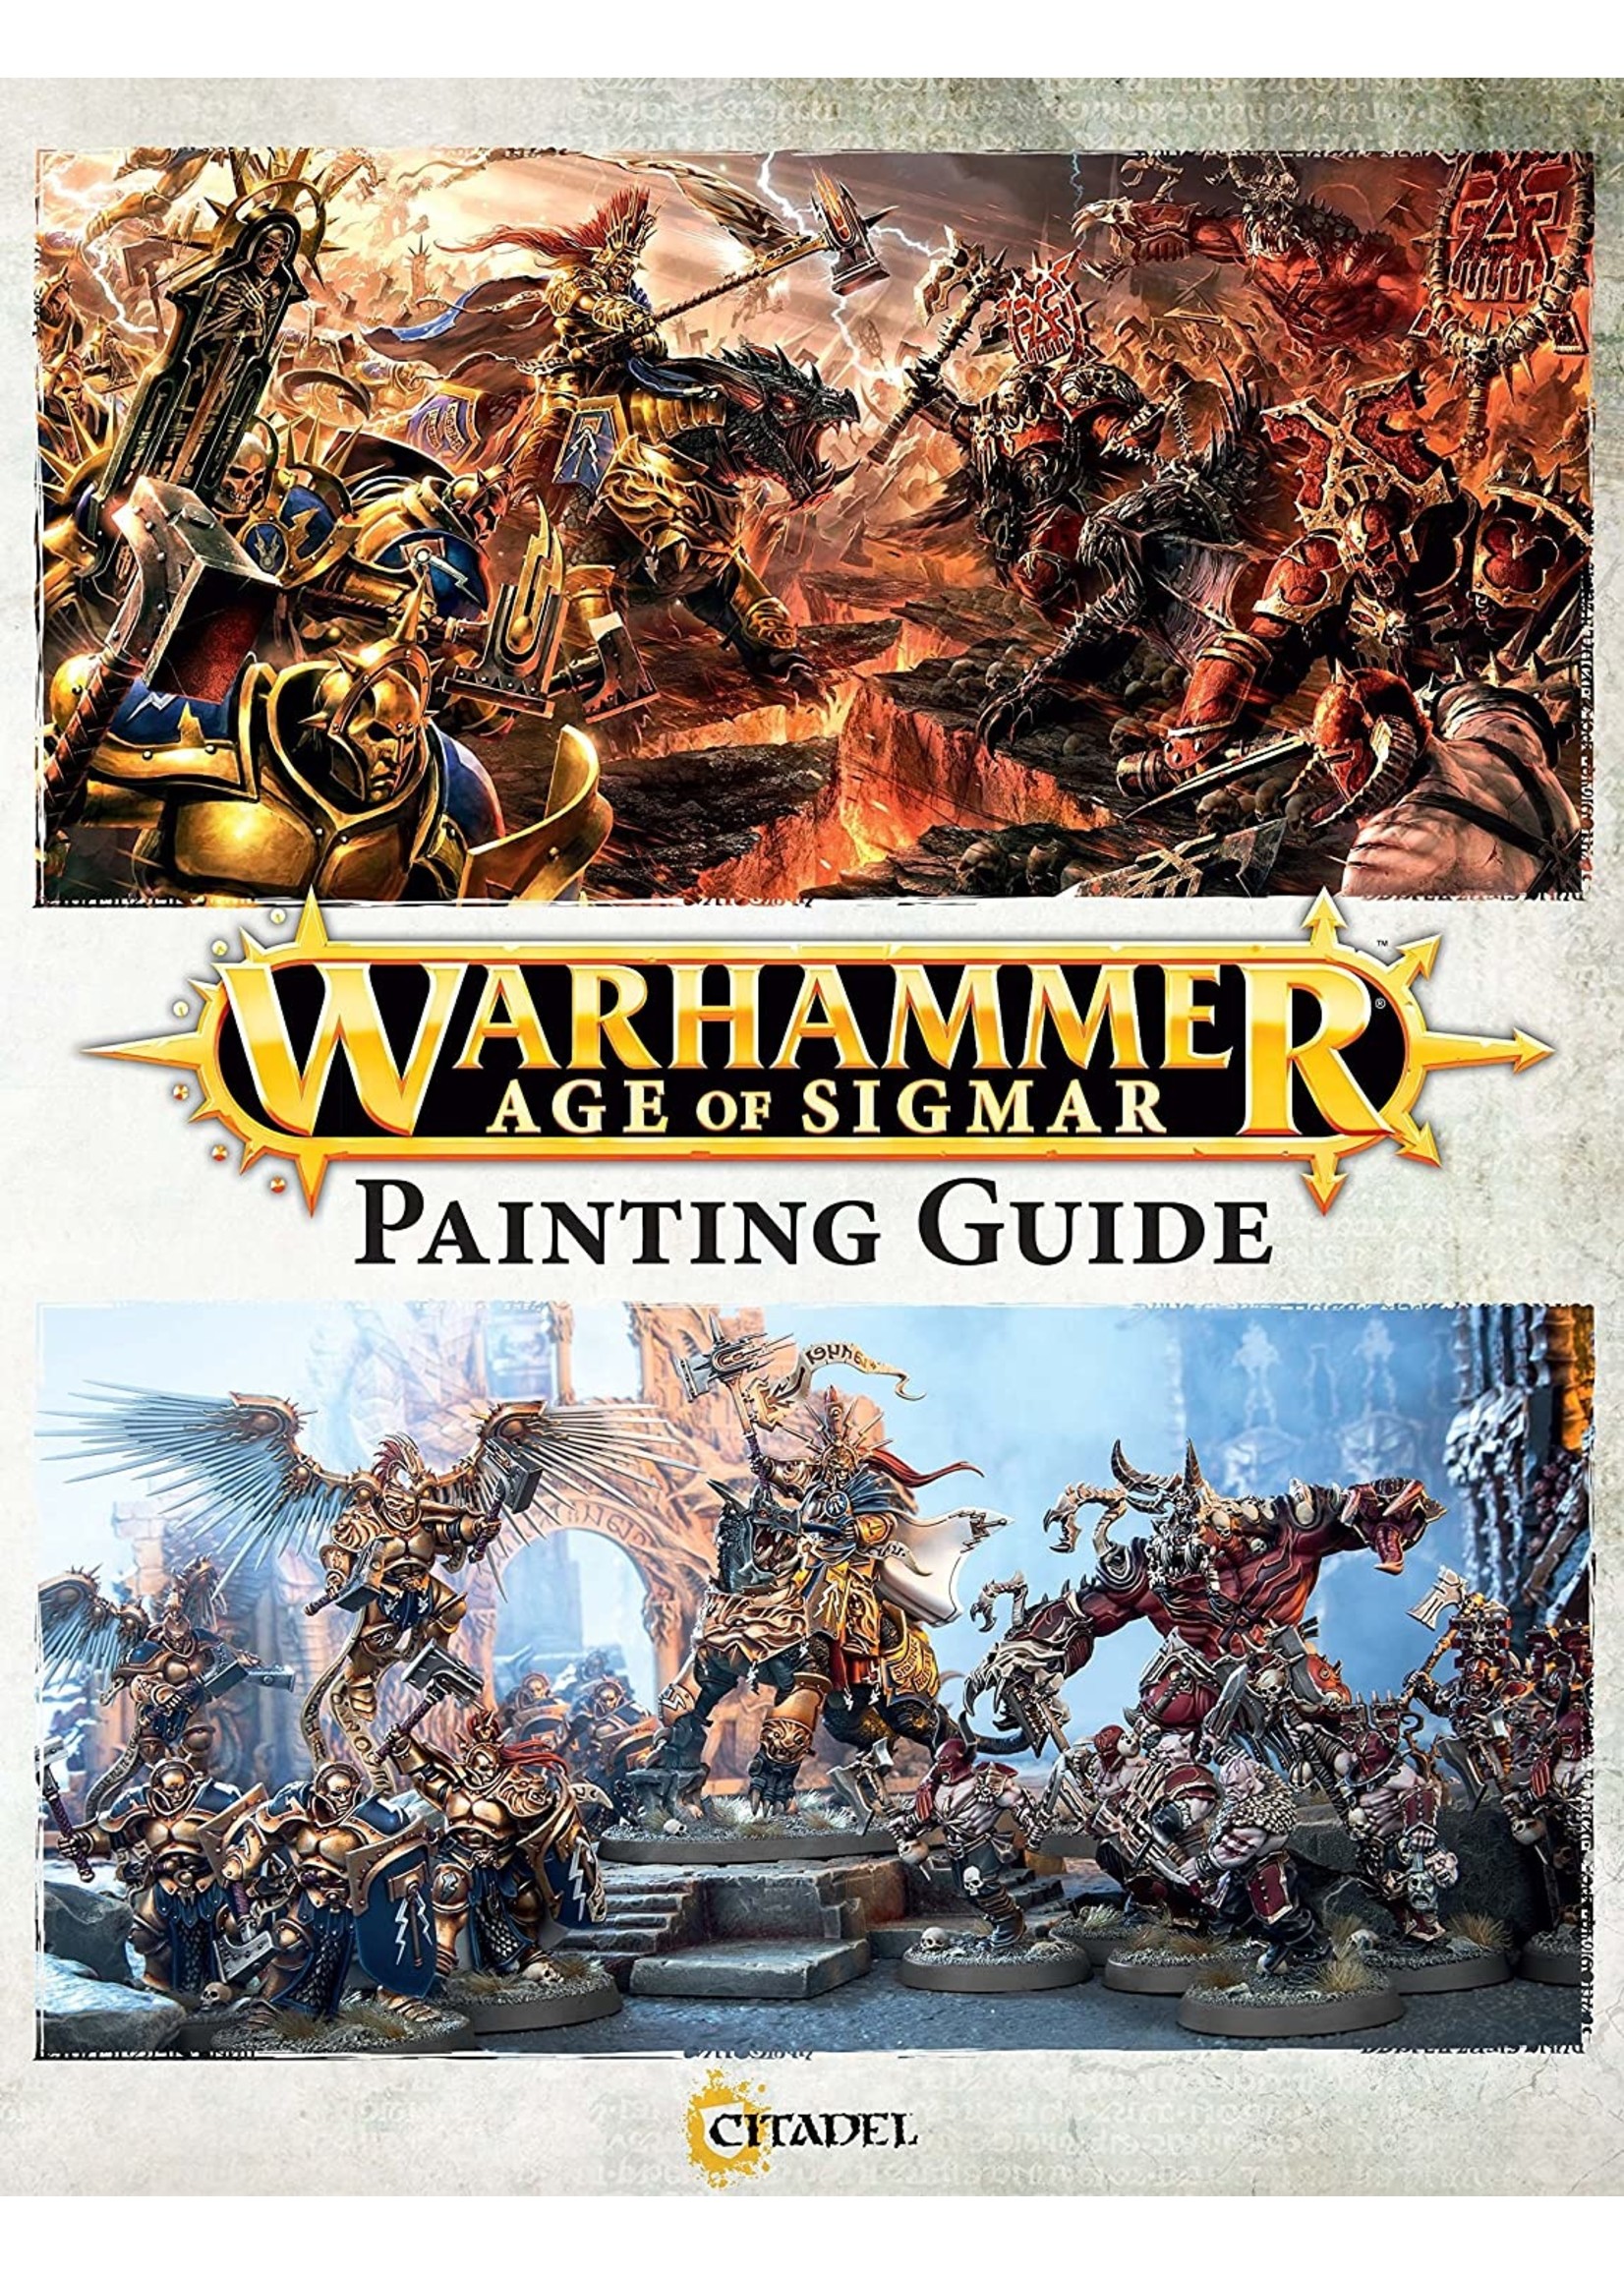 Warhammer Age of Sigmar: Painting Guide